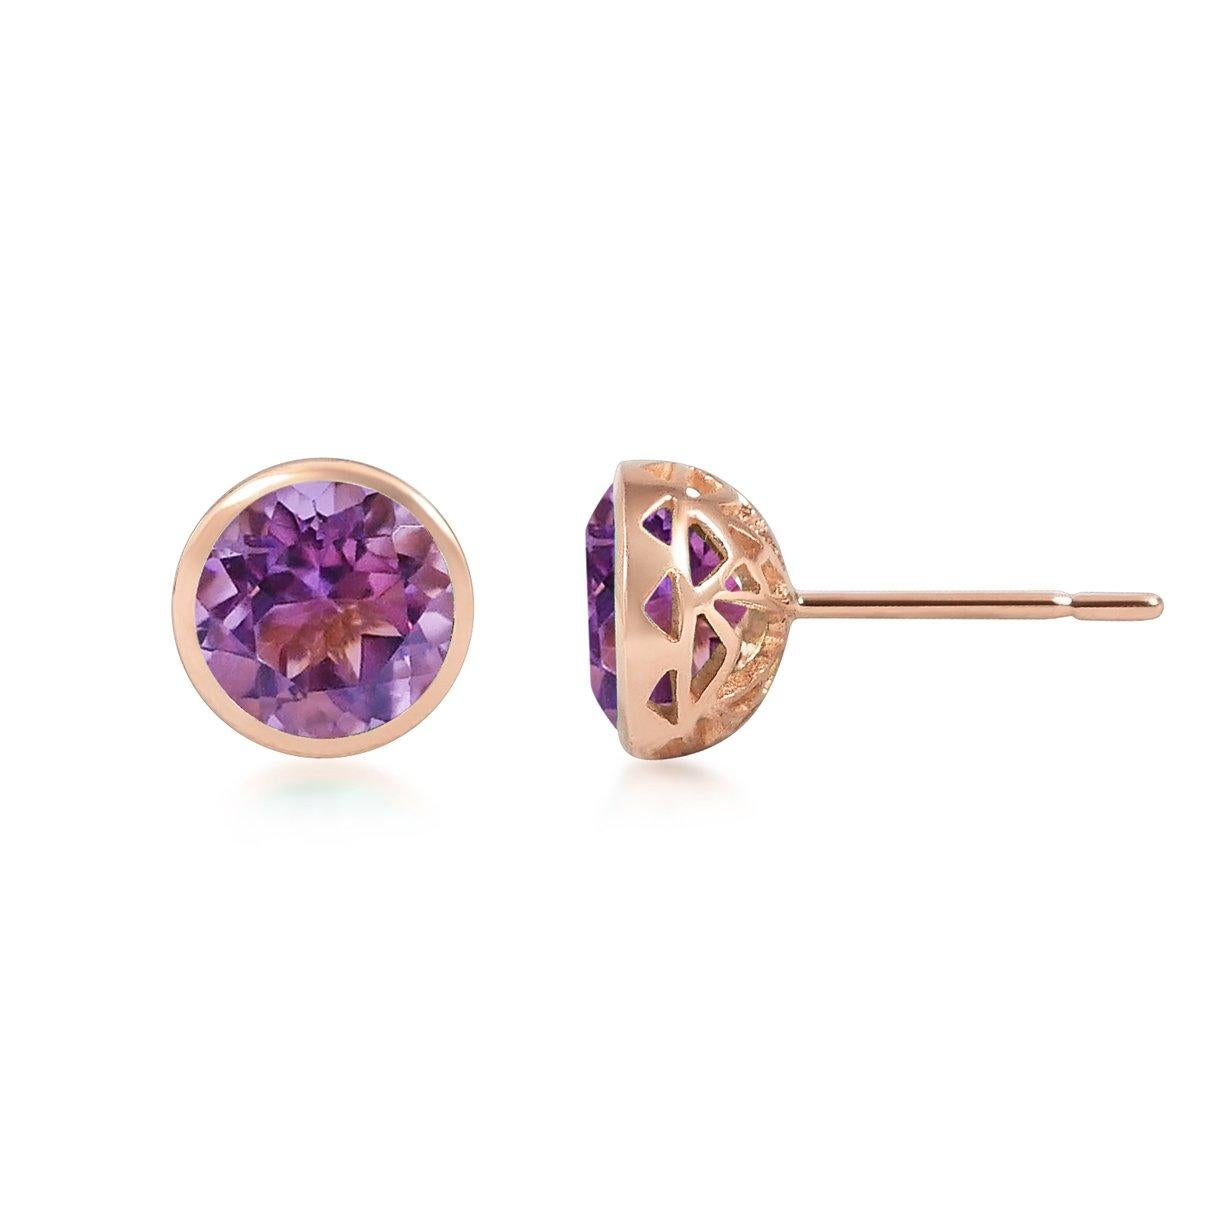 Round Cut Handcrafted 2.40 Carats Amethyst 18 Karat Rose Gold Stud Earrings For Sale